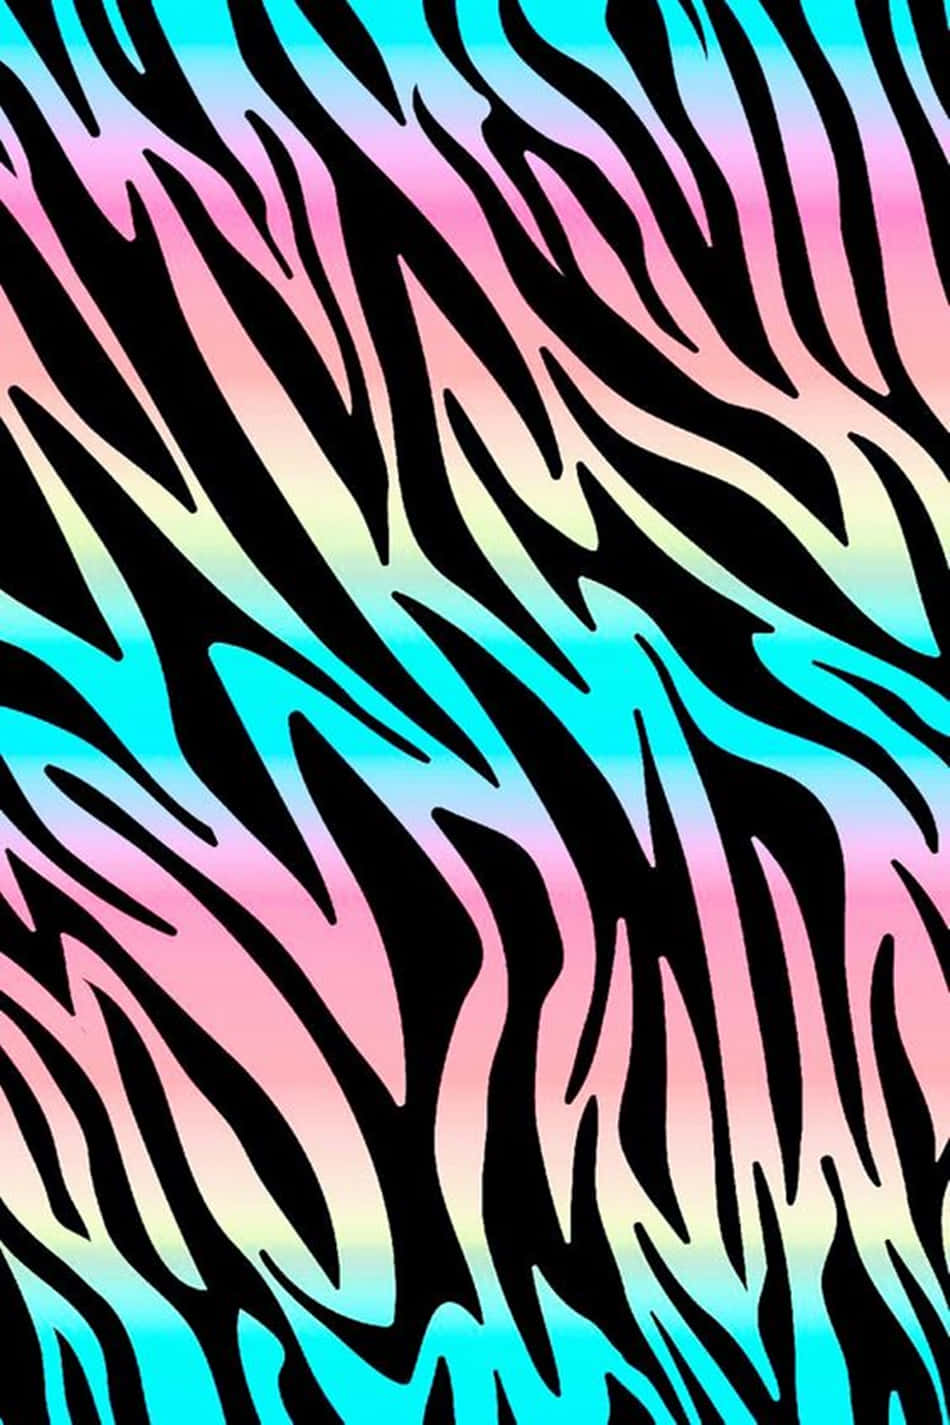 Download "Animal print adds wild style to any look!" Wallpaper